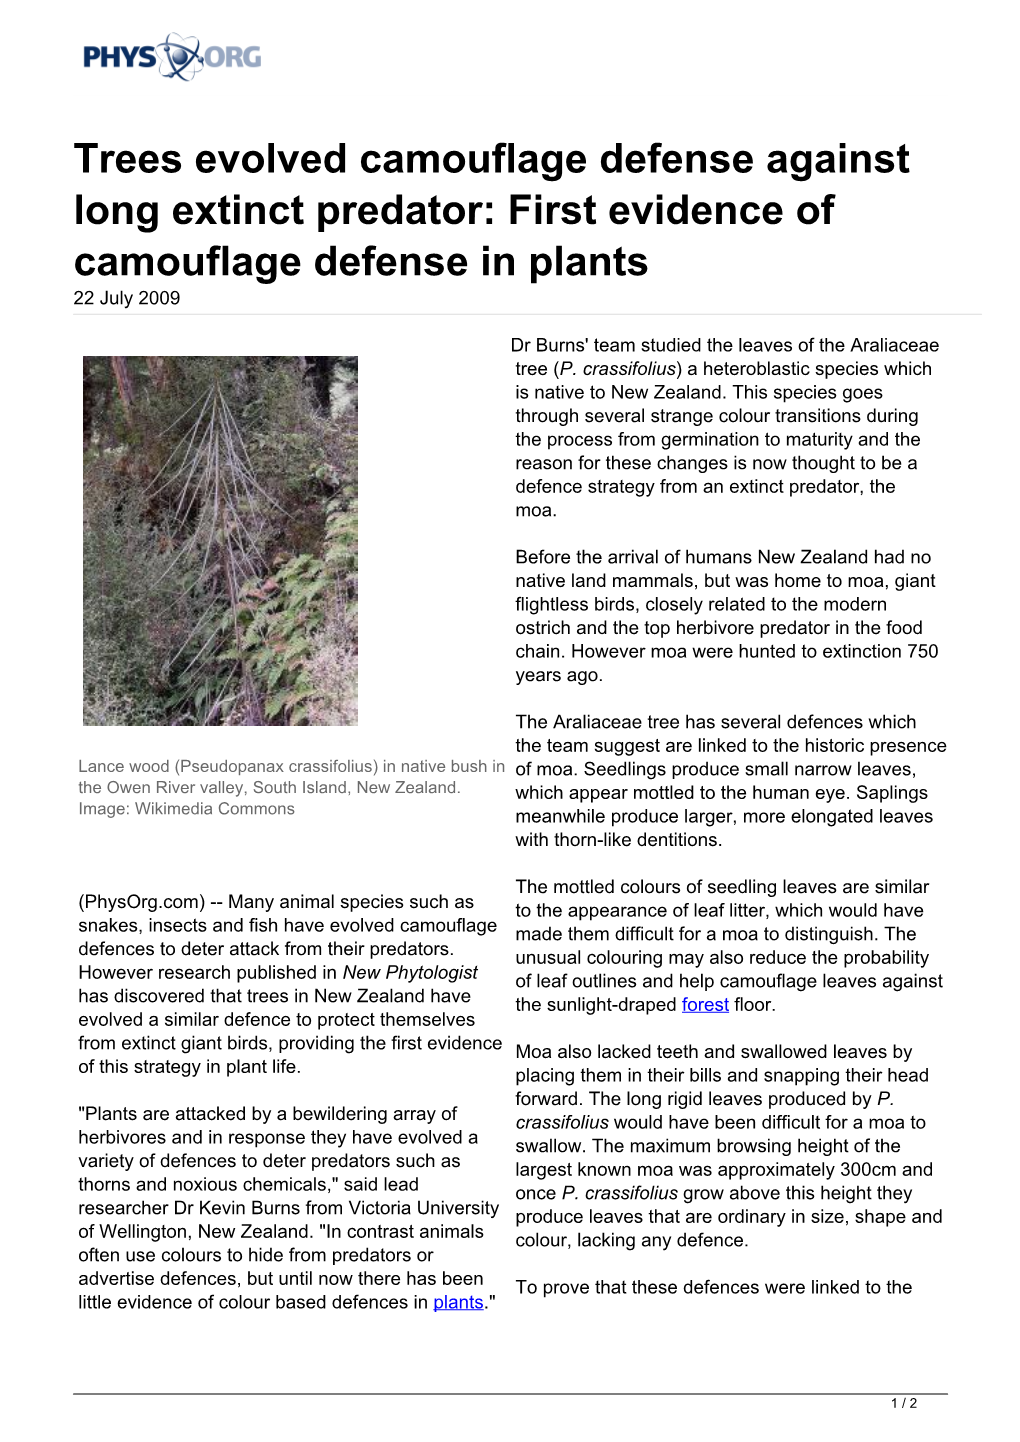 Trees Evolved Camouflage Defense Against Long Extinct Predator: First Evidence of Camouflage Defense in Plants 22 July 2009